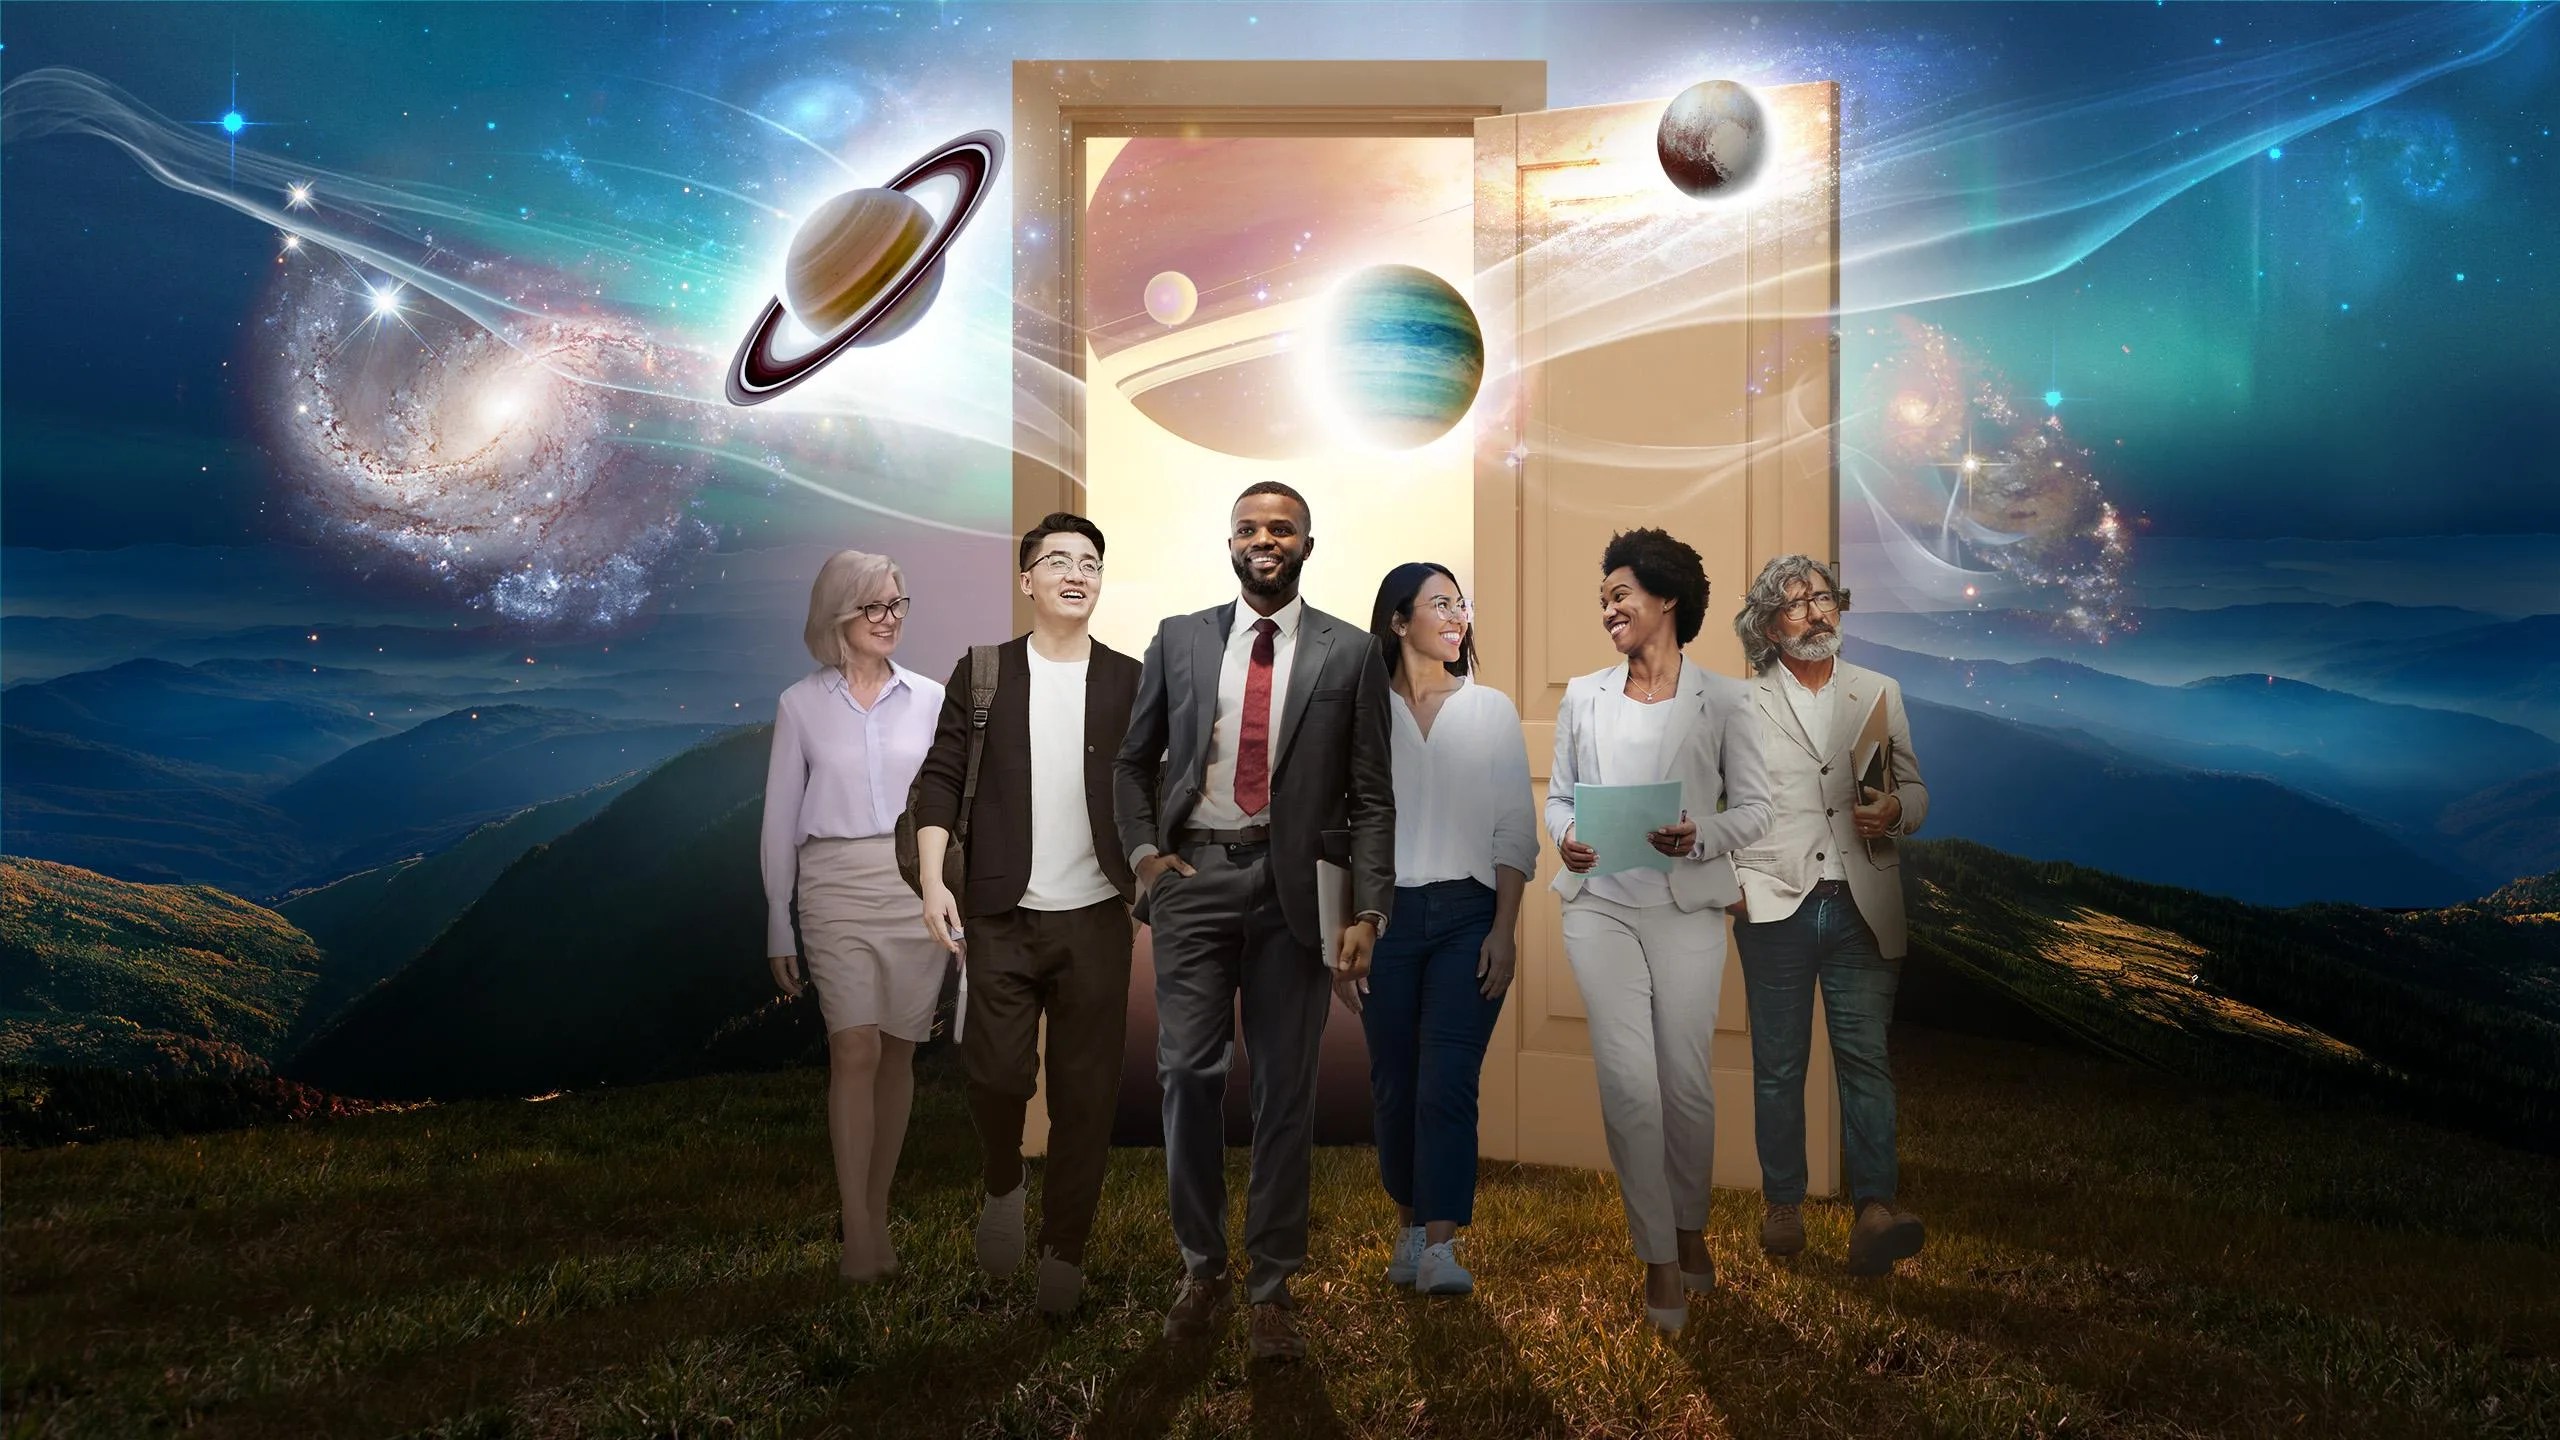 A group of people walk through an open doorway, all smiling and looking at one another, a variety of ages, genders, and skin tones. In the door they pass through, an array of planets, stars, and astronomical forms burst through, filling the sky.